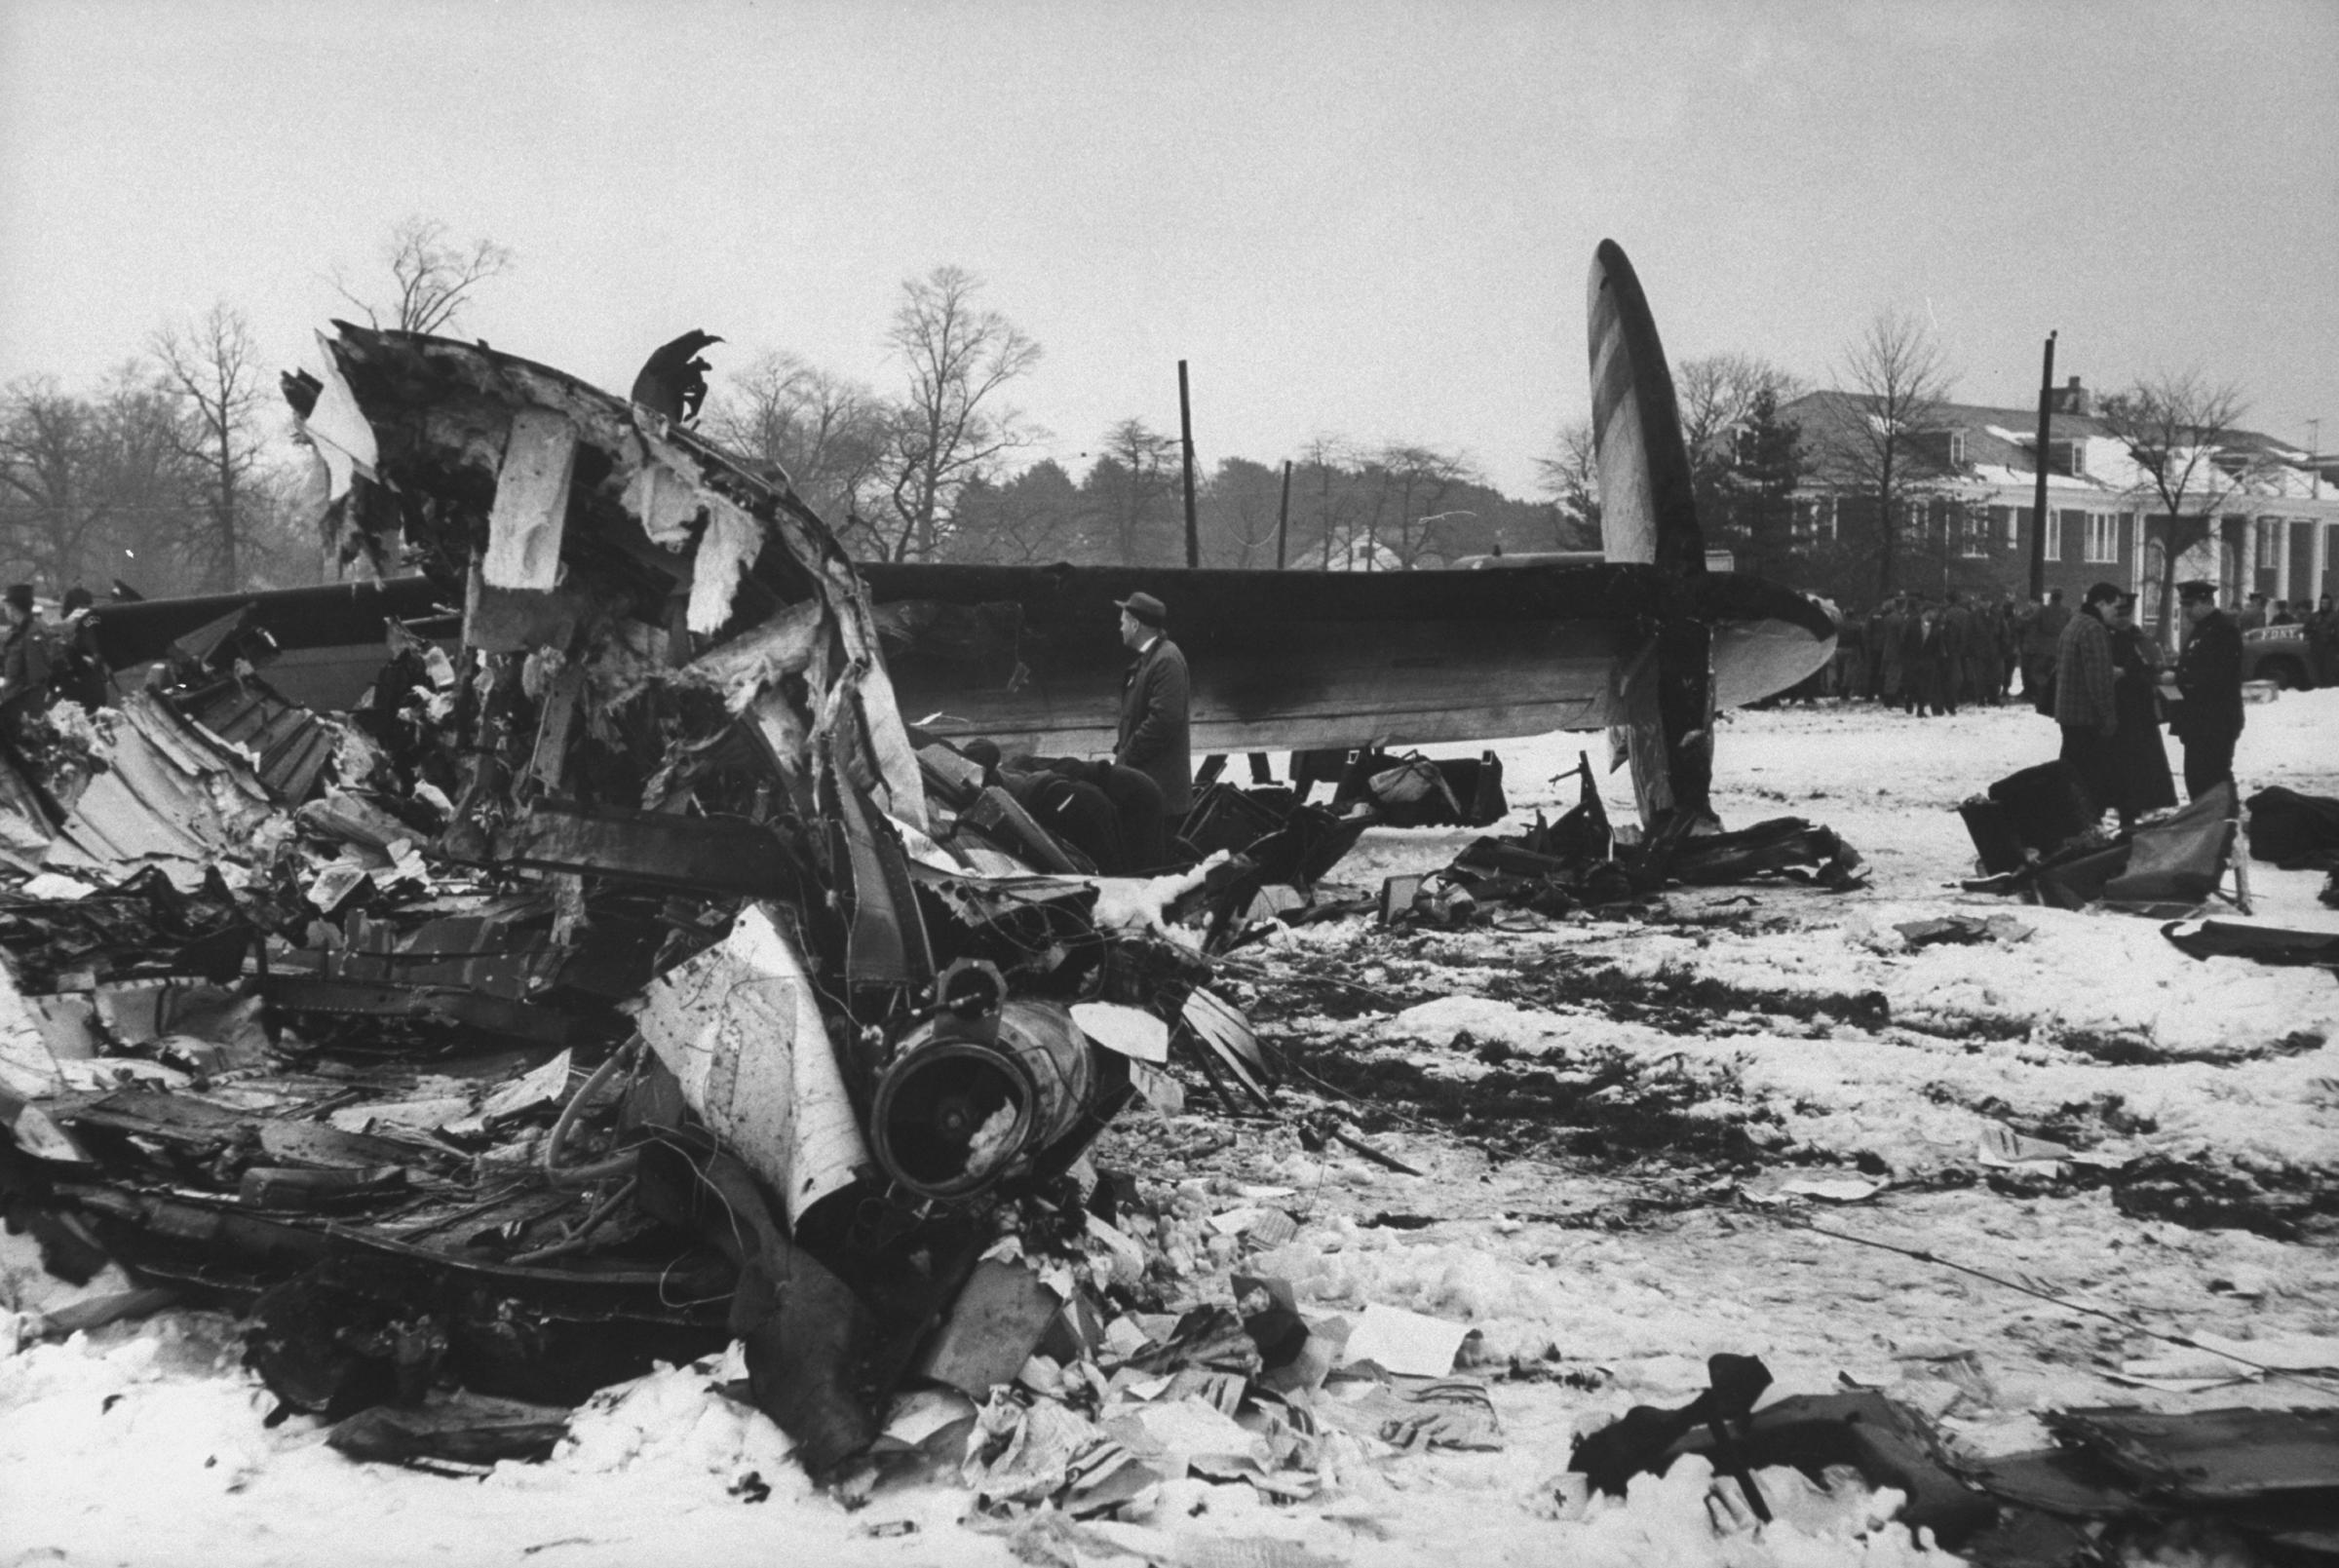 Wreckage on Staten Island in aftermath of air disaster, December 1960.